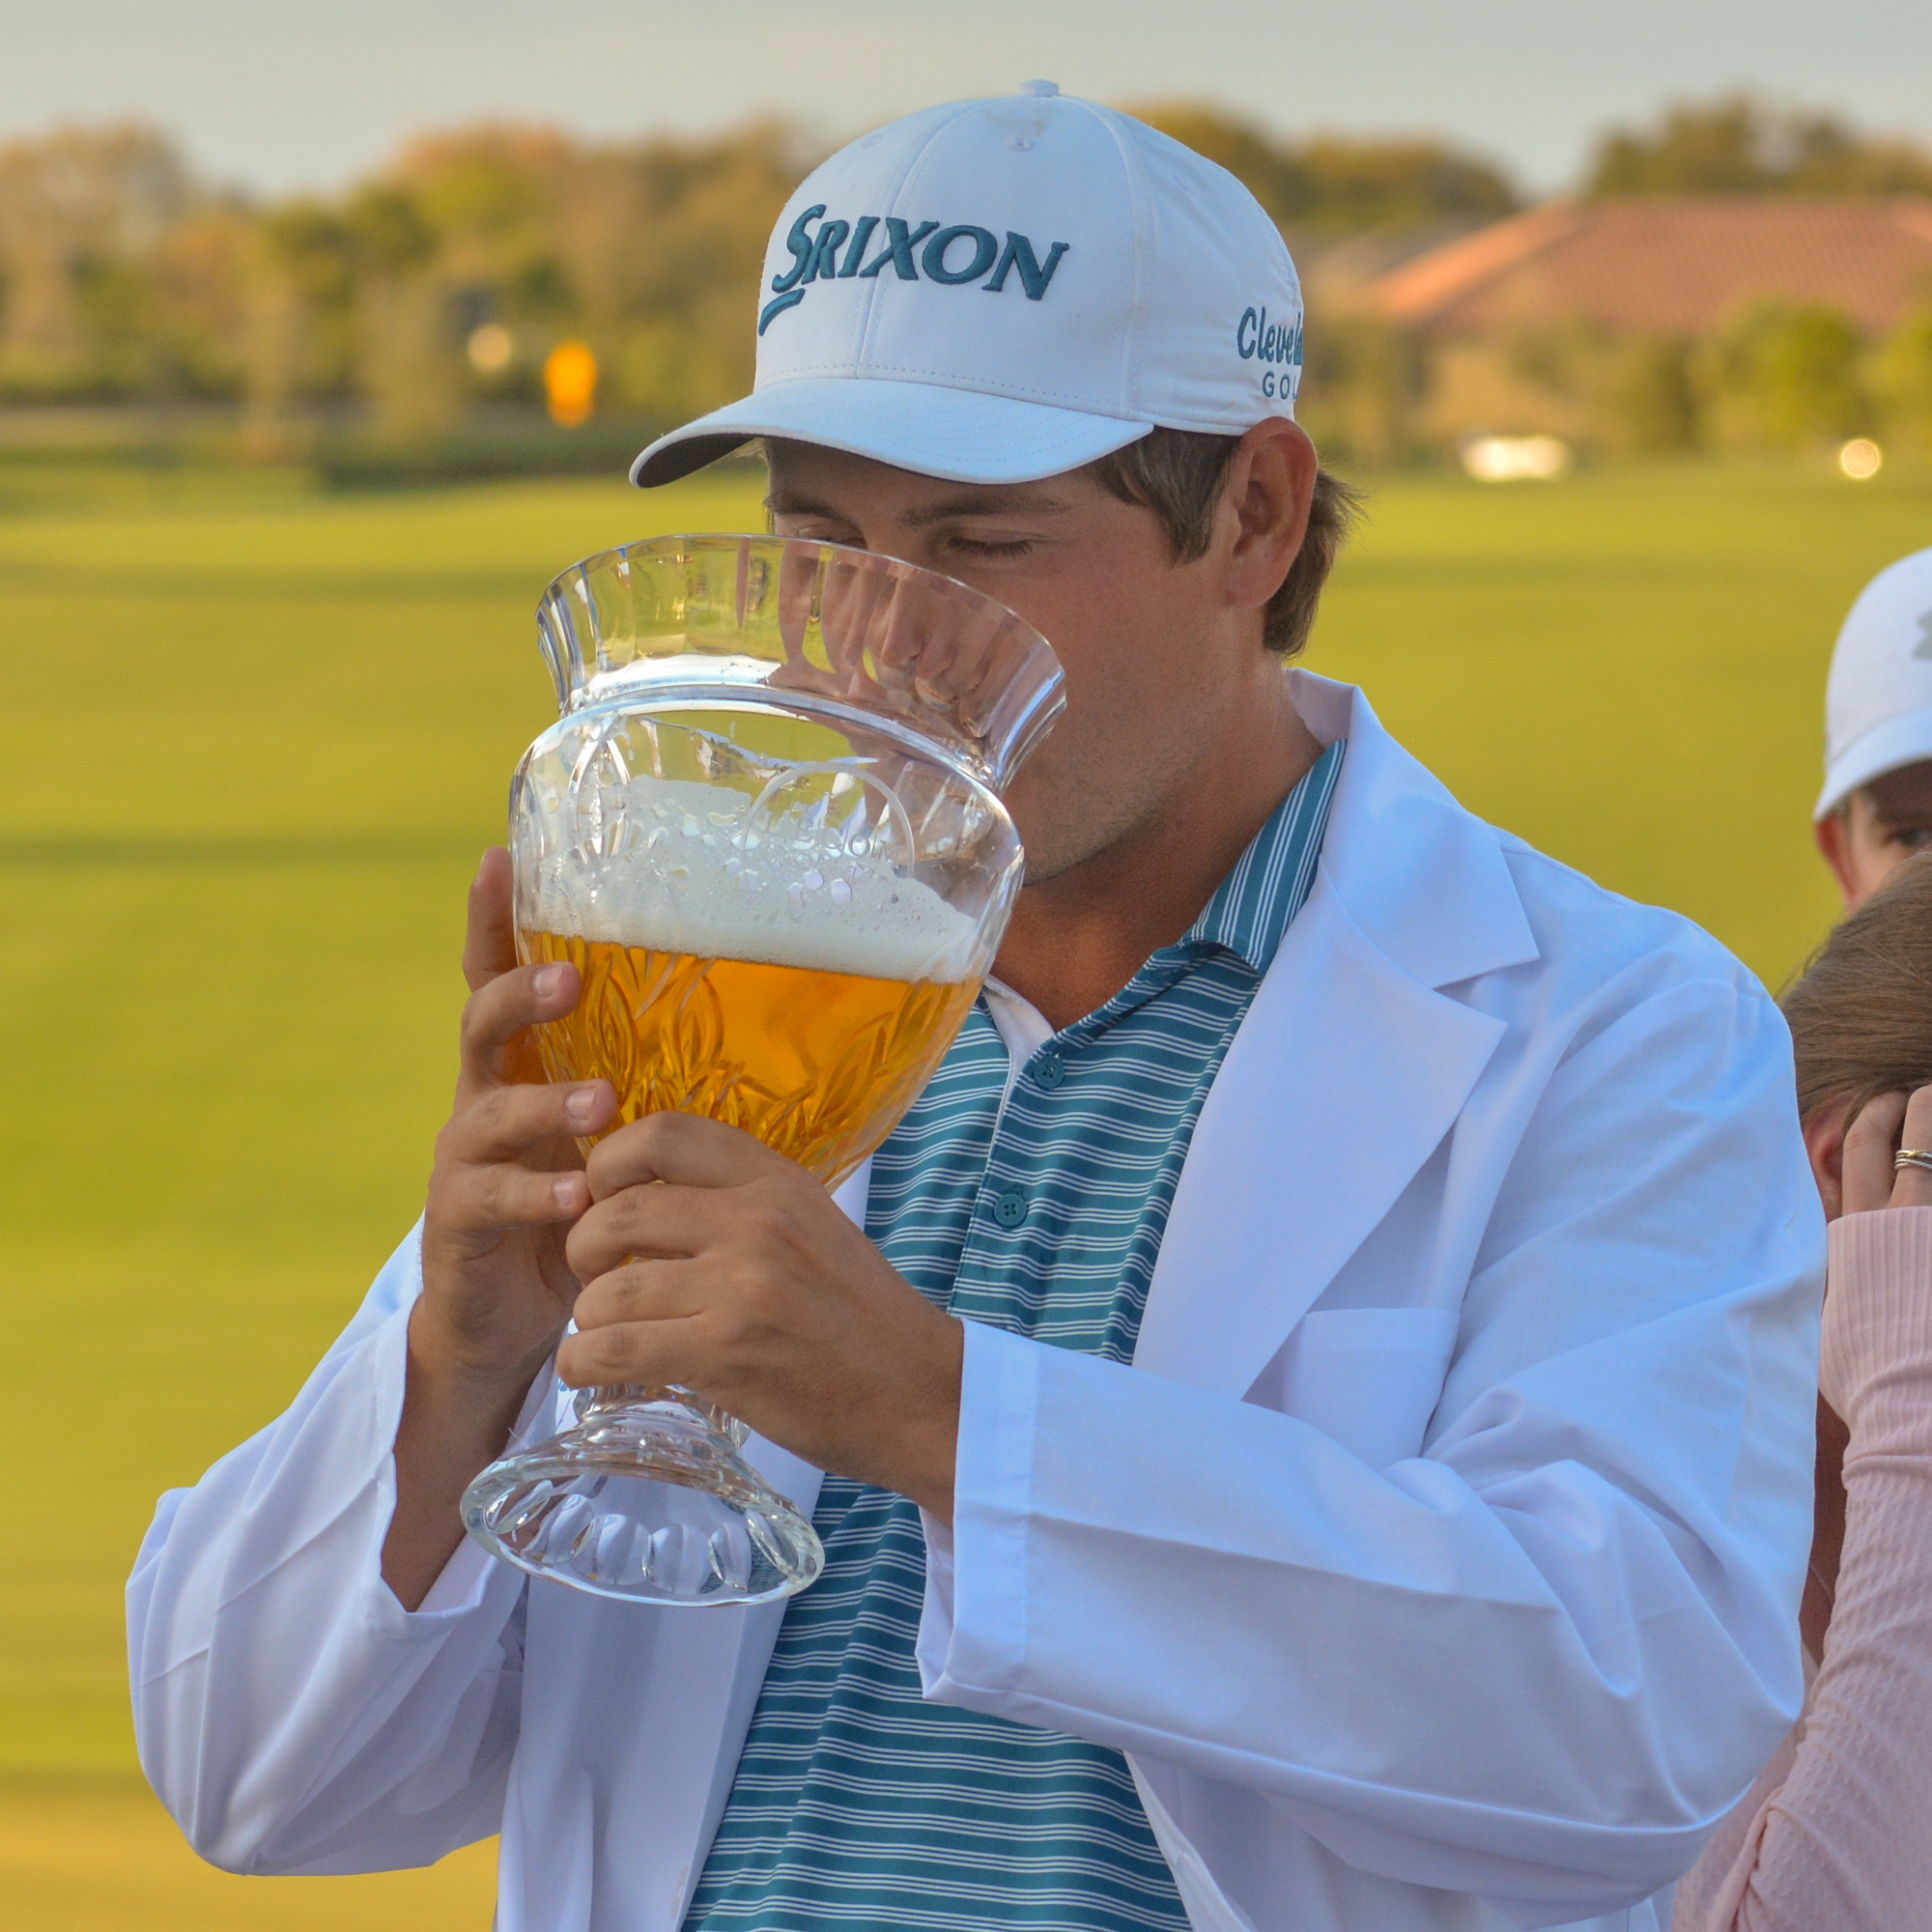 4. Andrew Novak celebrated his 2020 LECOM Suncoast Classic win in February from drinking out of the tournament trophy. Novak took home a $108,000 purse.